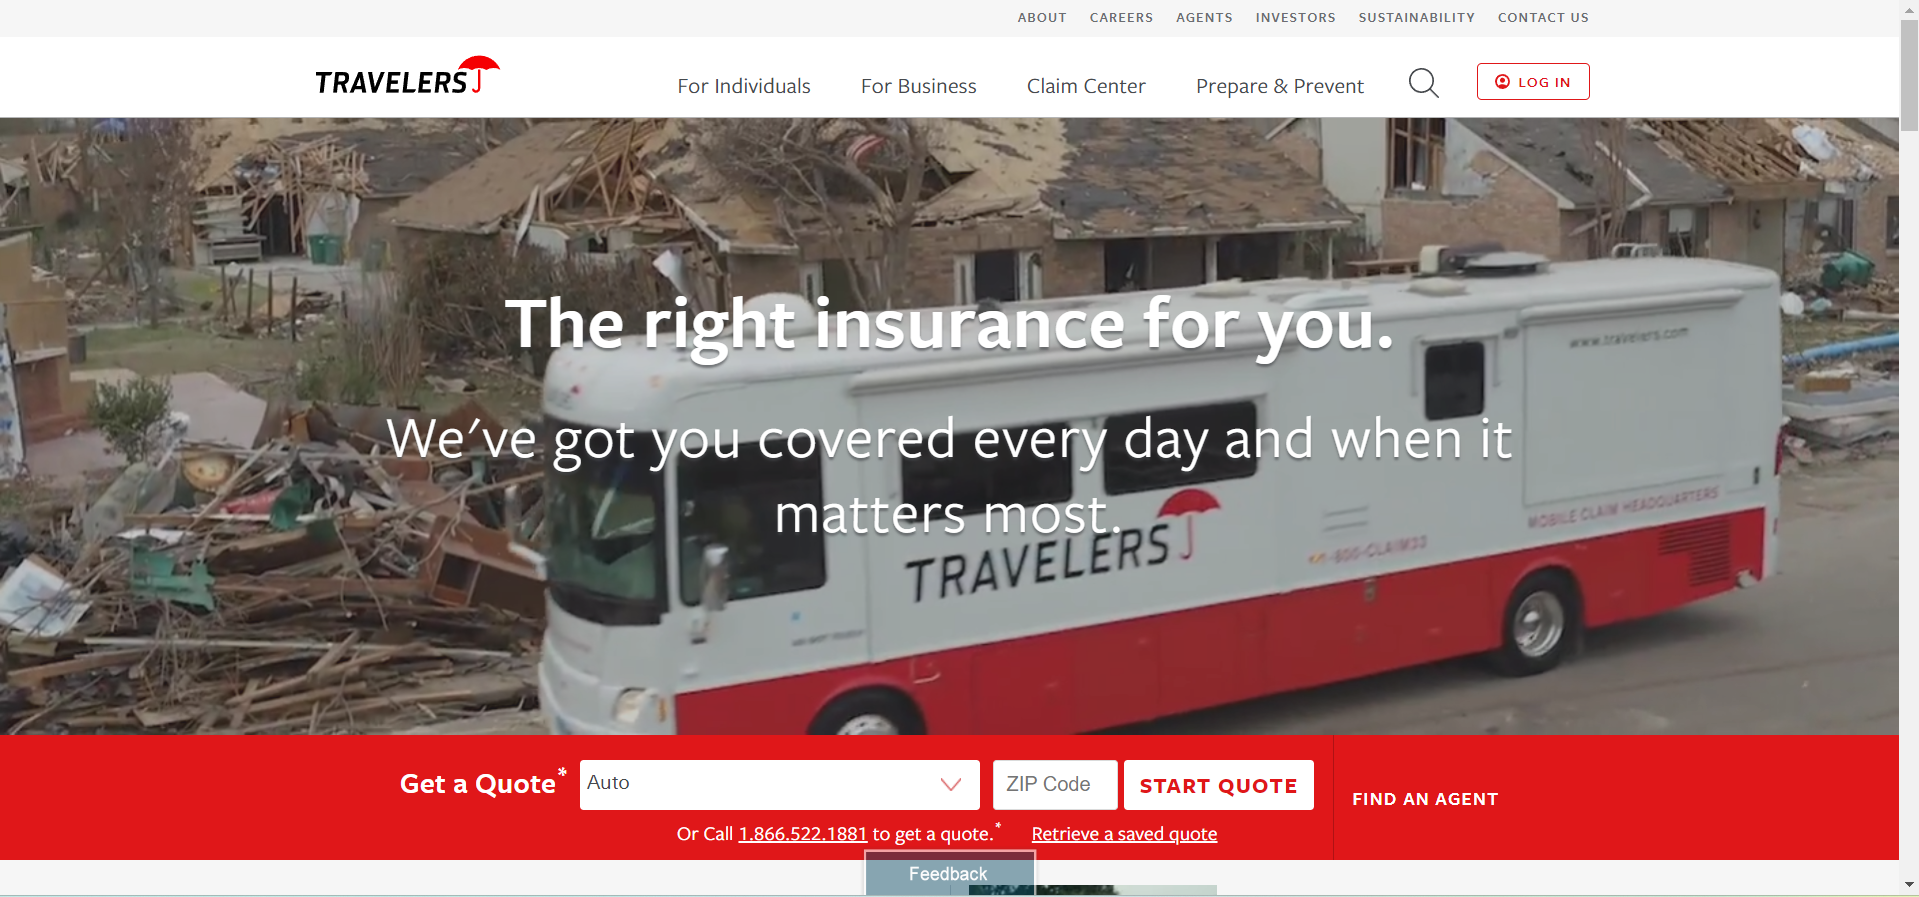 Best Business Insurance for First Aid Training Companies: Travelers